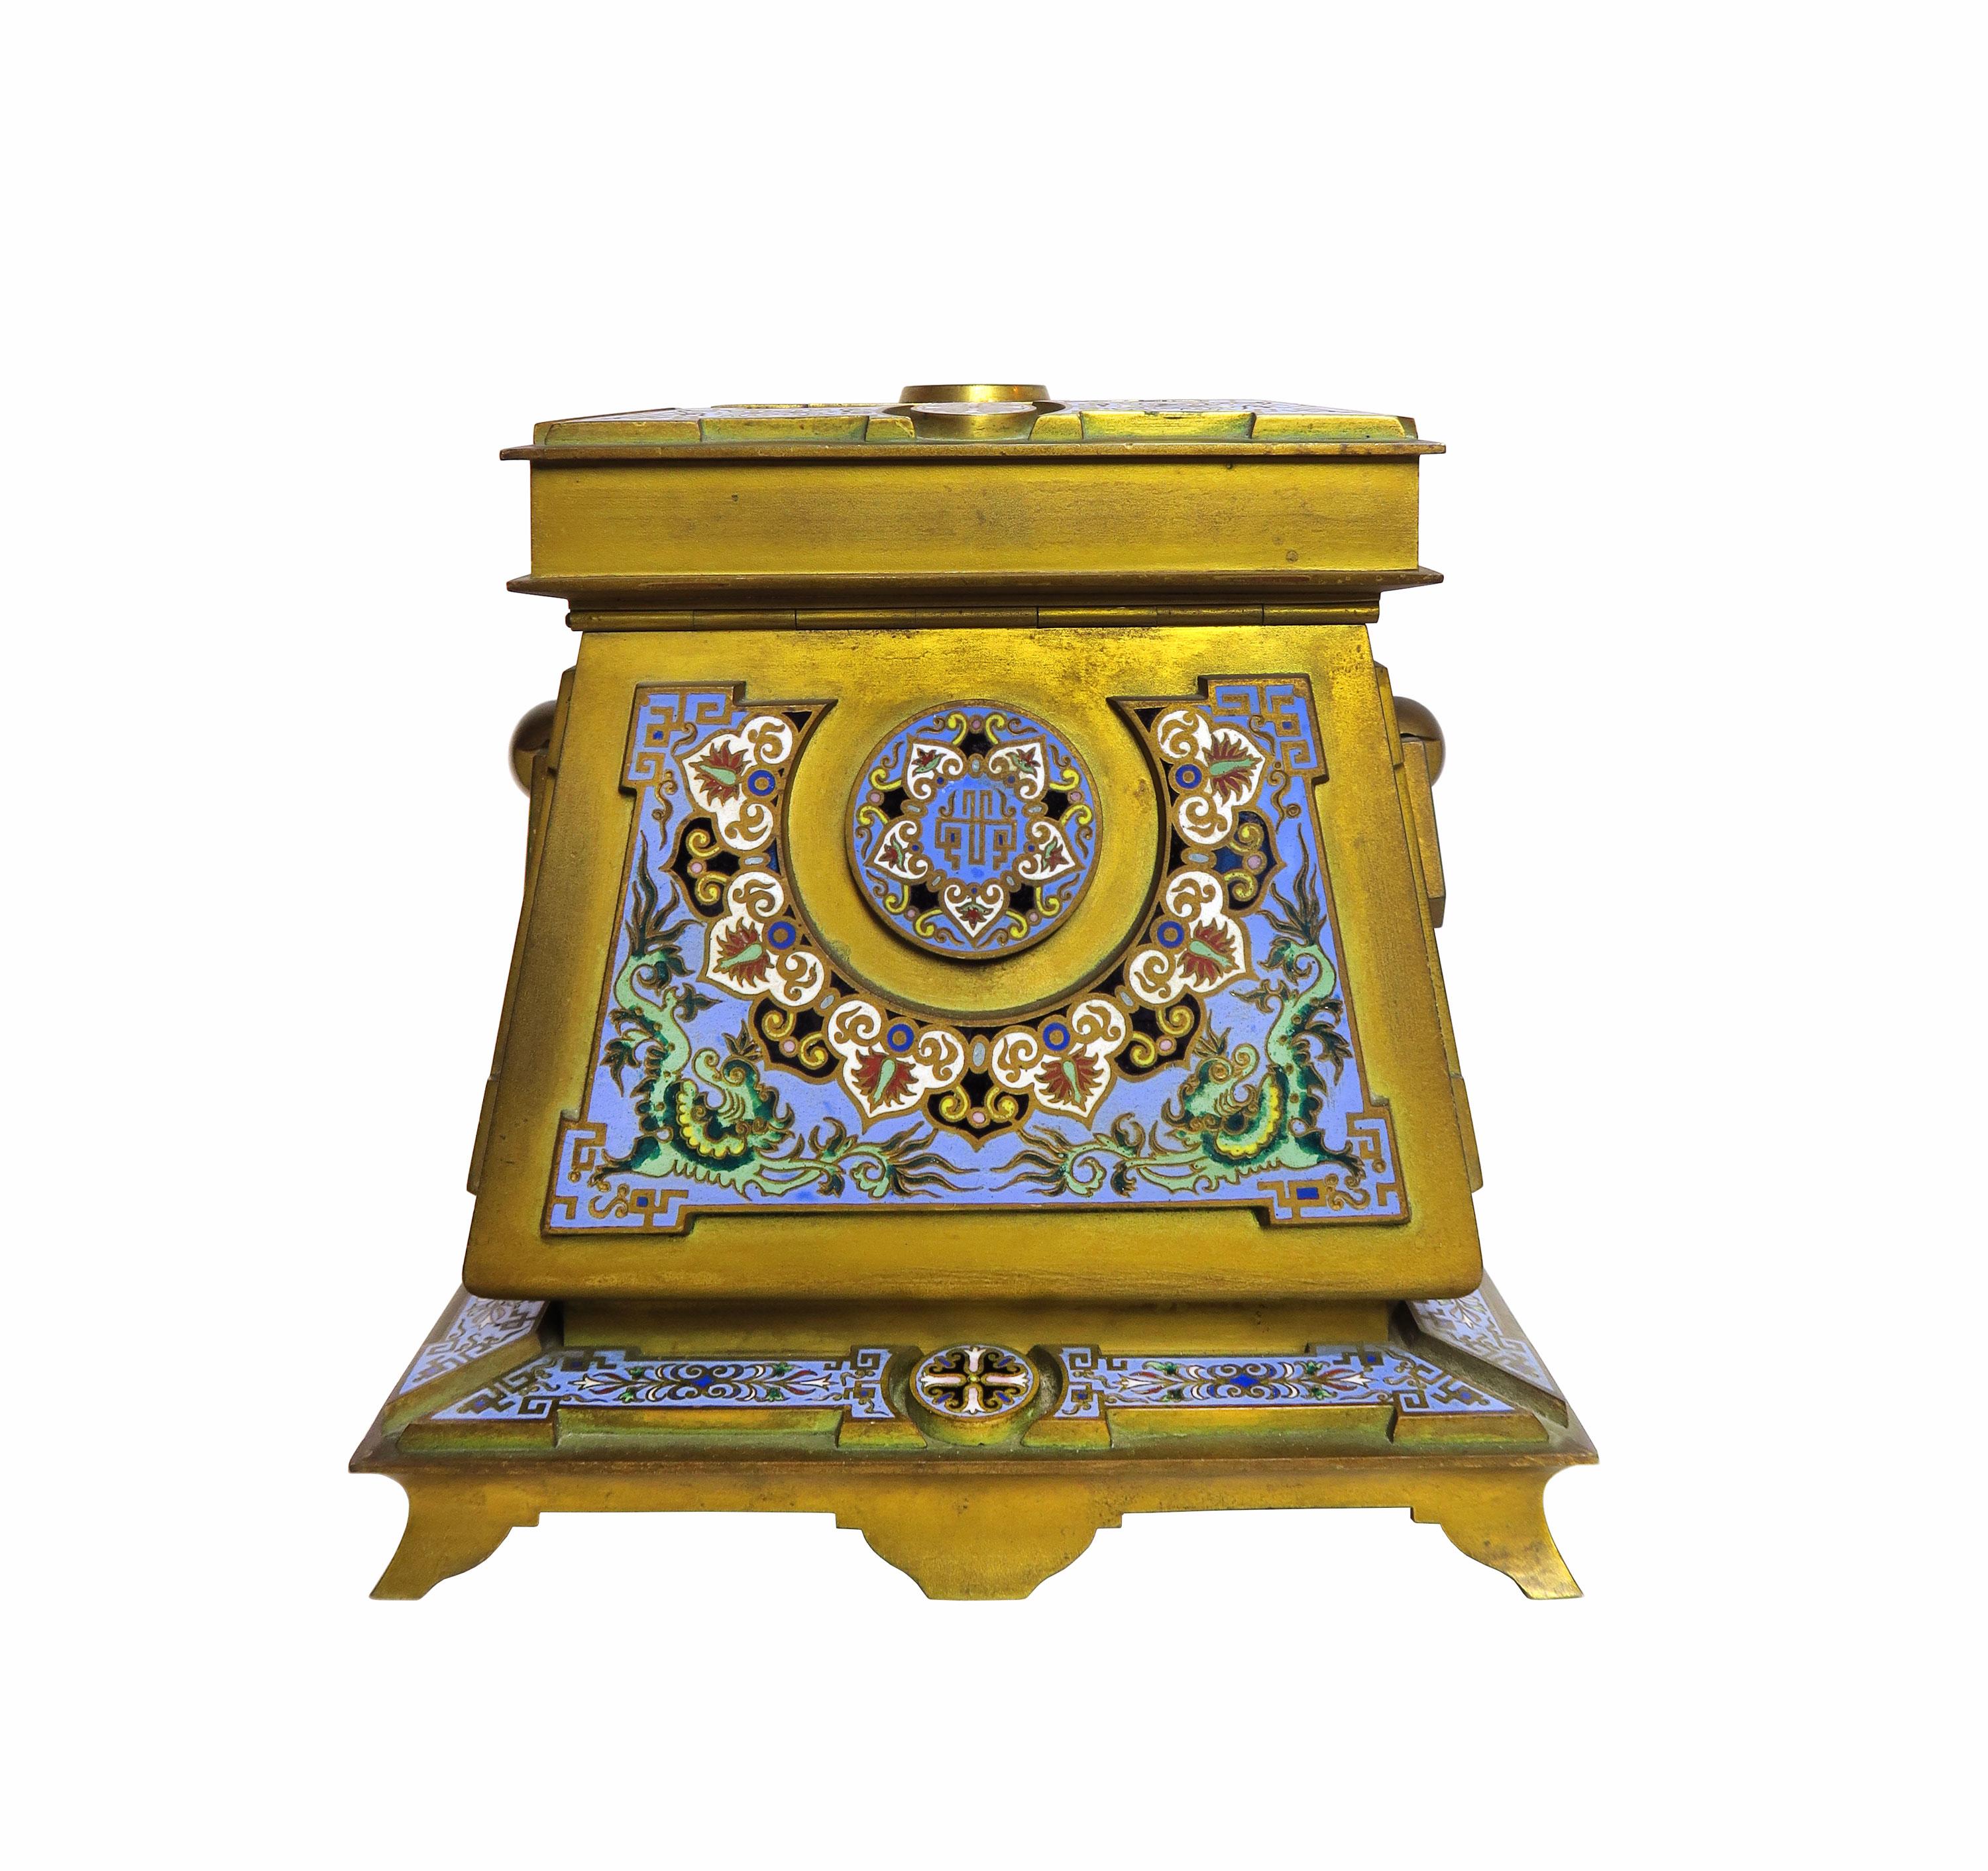 French Gilt-Bronze and Cloisonne Enamel Casket Possibly by Ferdinand Barbedienne 1